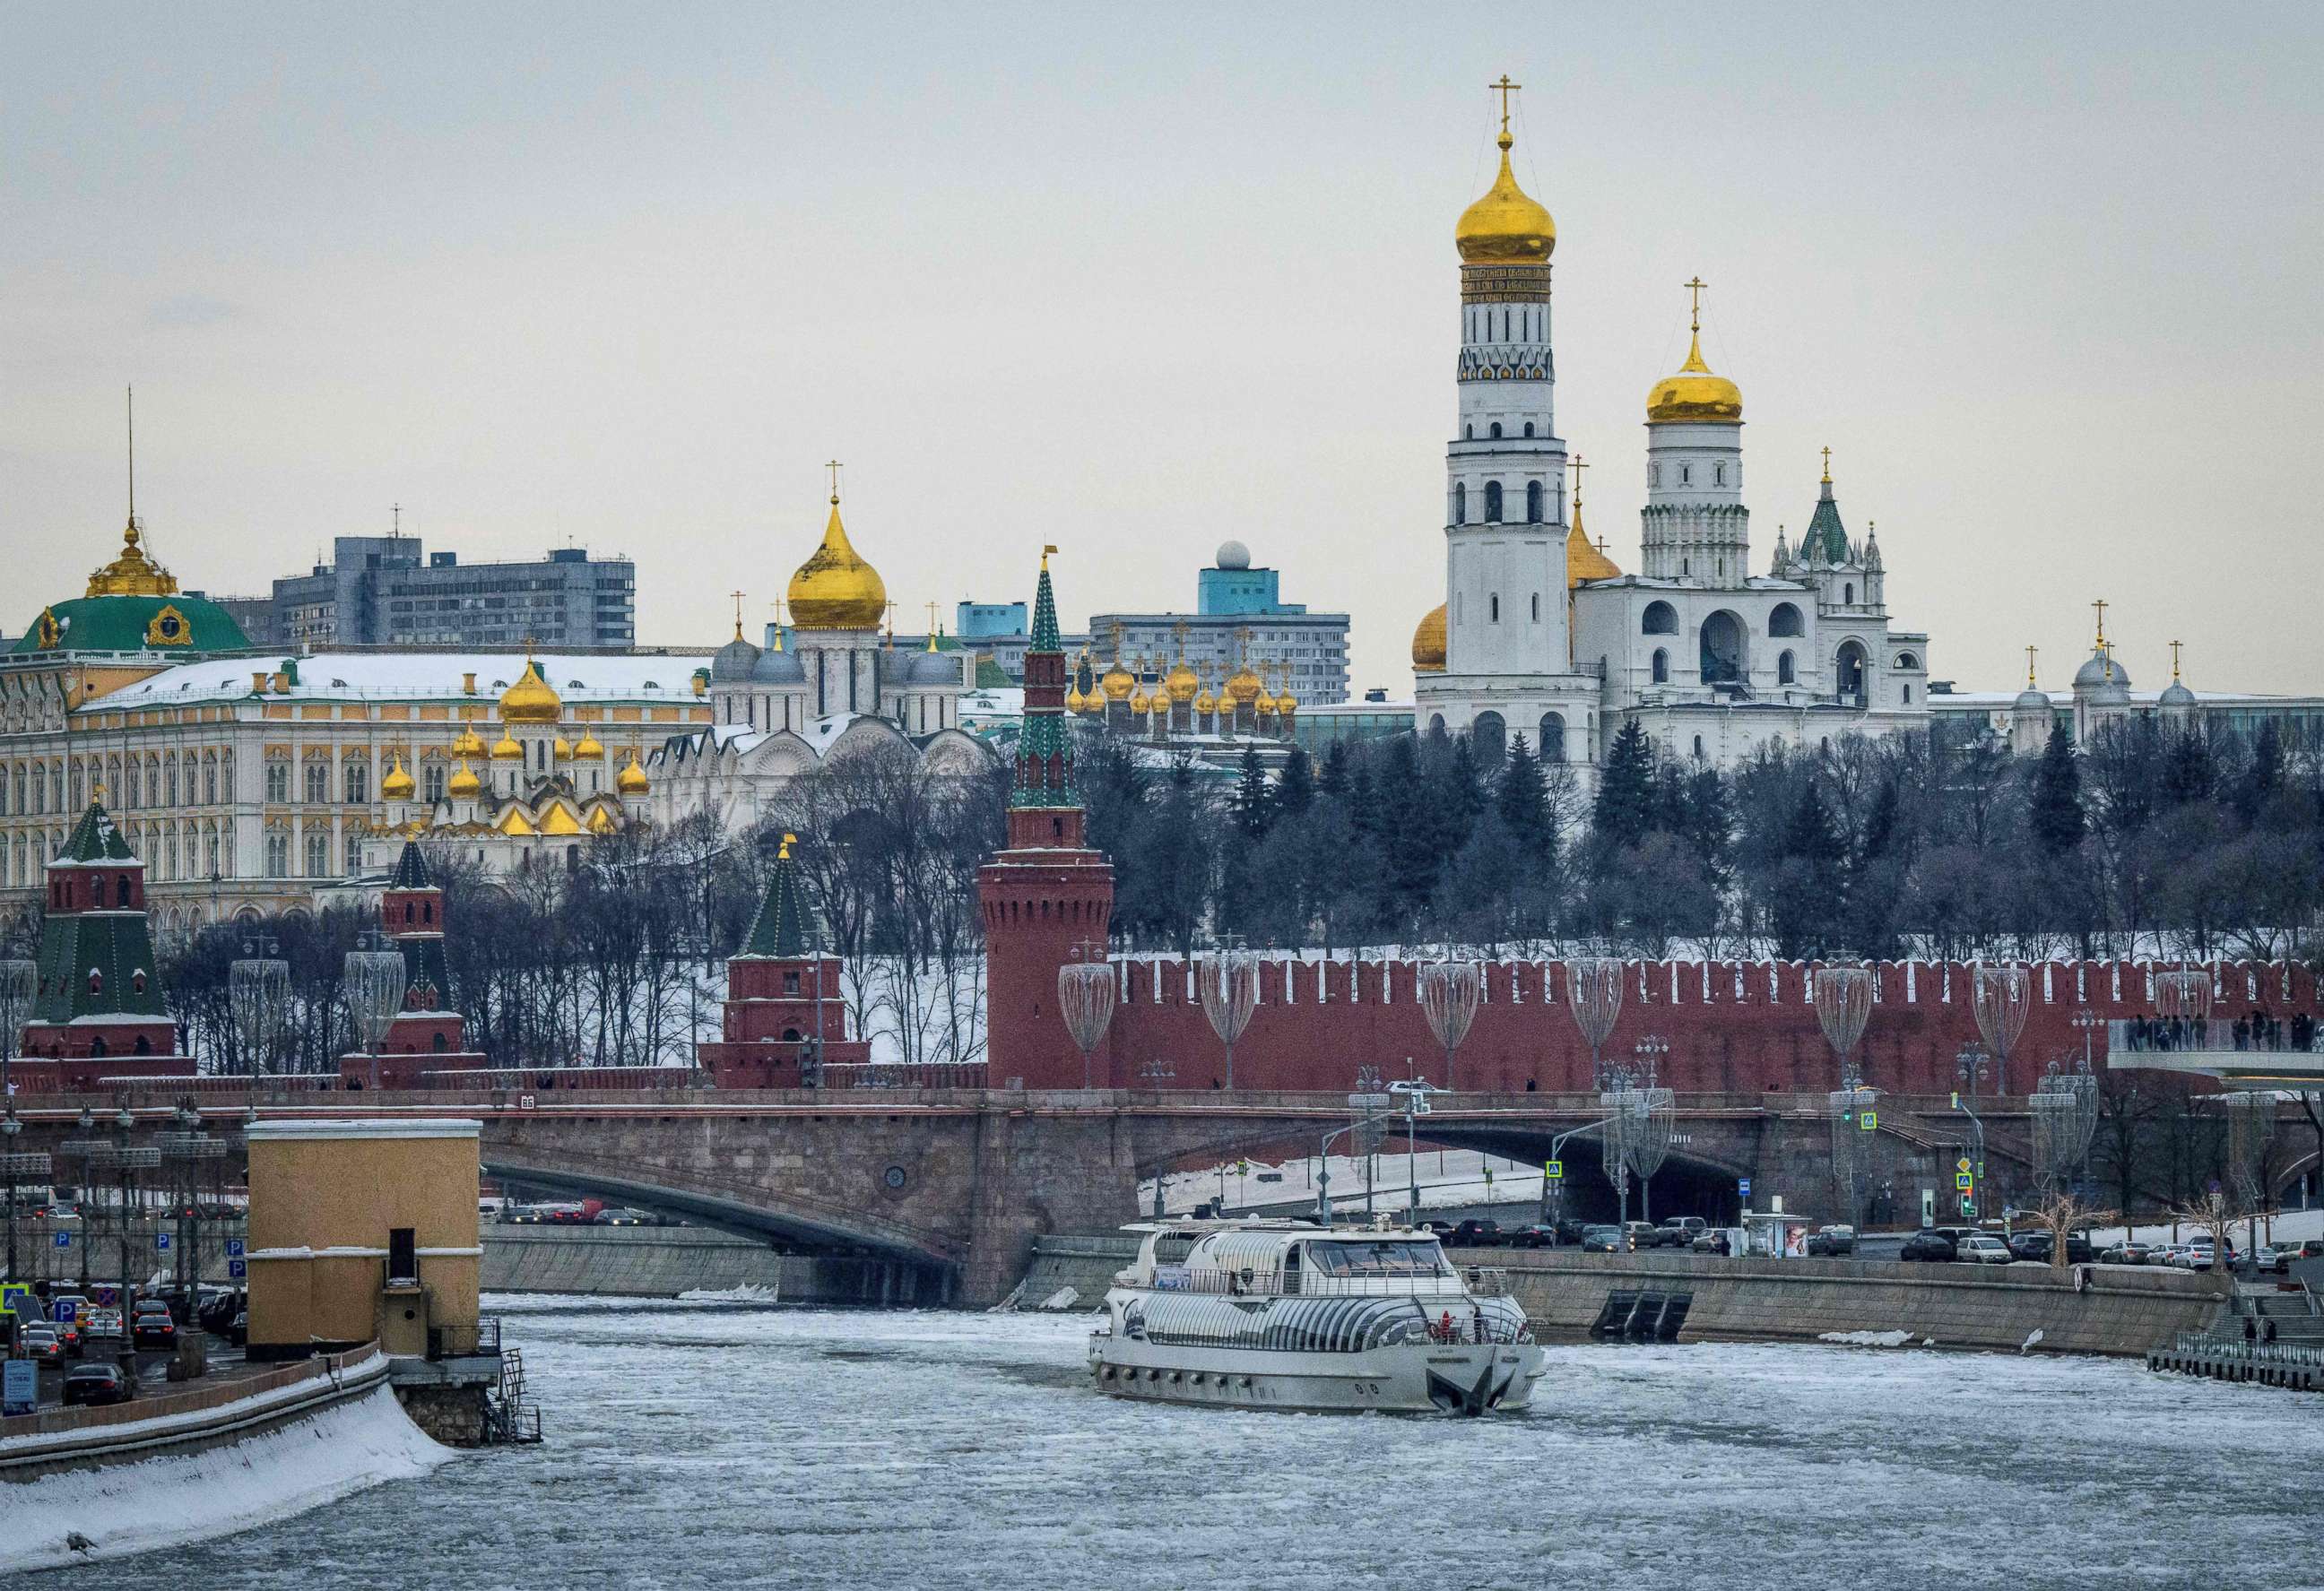 PHOTO: A tourist boat breaks through the frozen Moskva river outside the Kremlin in Moscow on March 13, 2018.